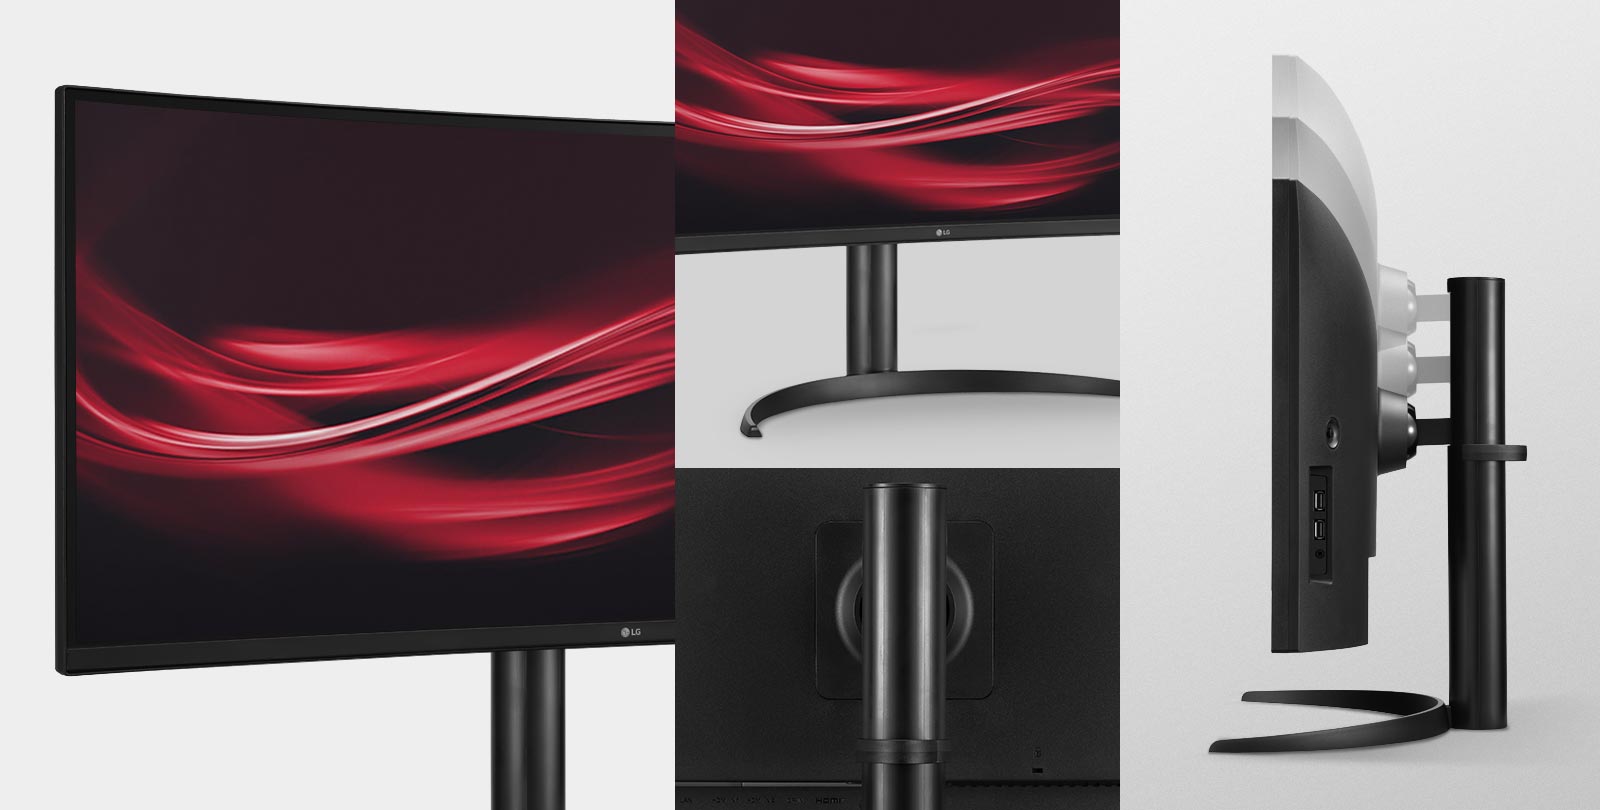 The One Click Stand makes it easy to install without any other equipment, and flexibly adjusts the height and tilt of the big screen to position it in the optimal position for you.